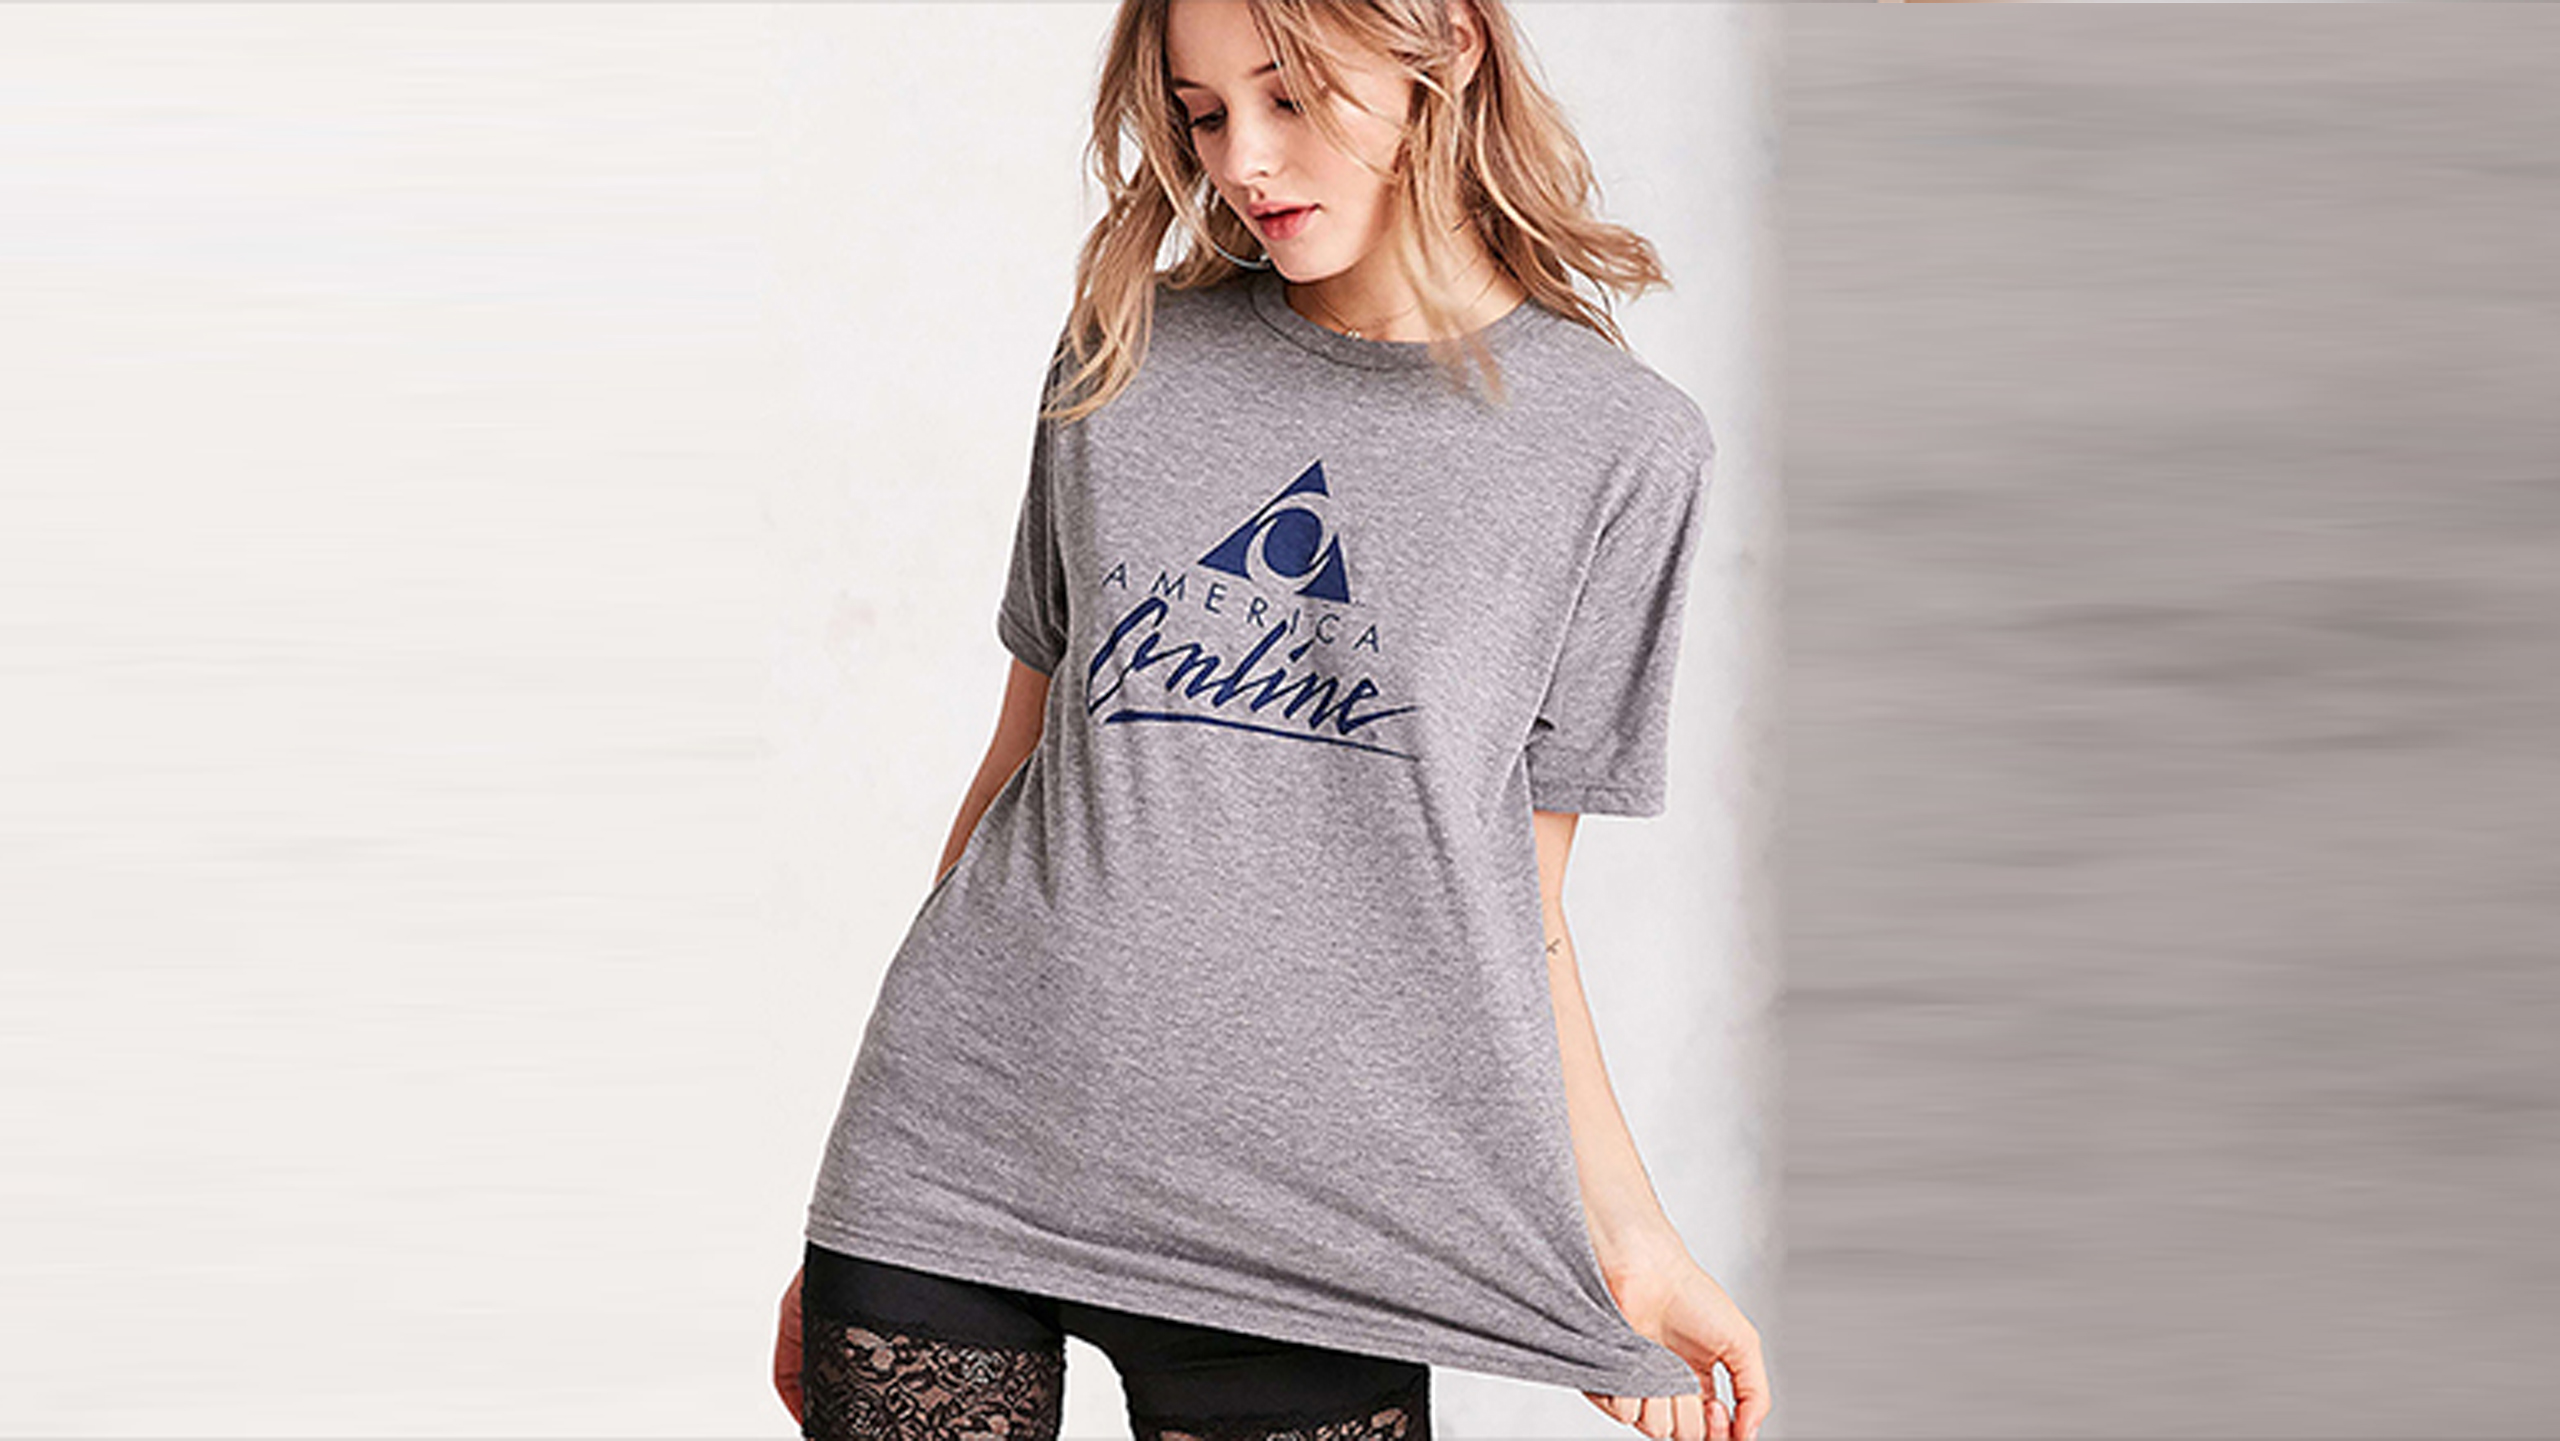 Urban Outfitters Wants You to Buy a $45 AOL T-Shirt